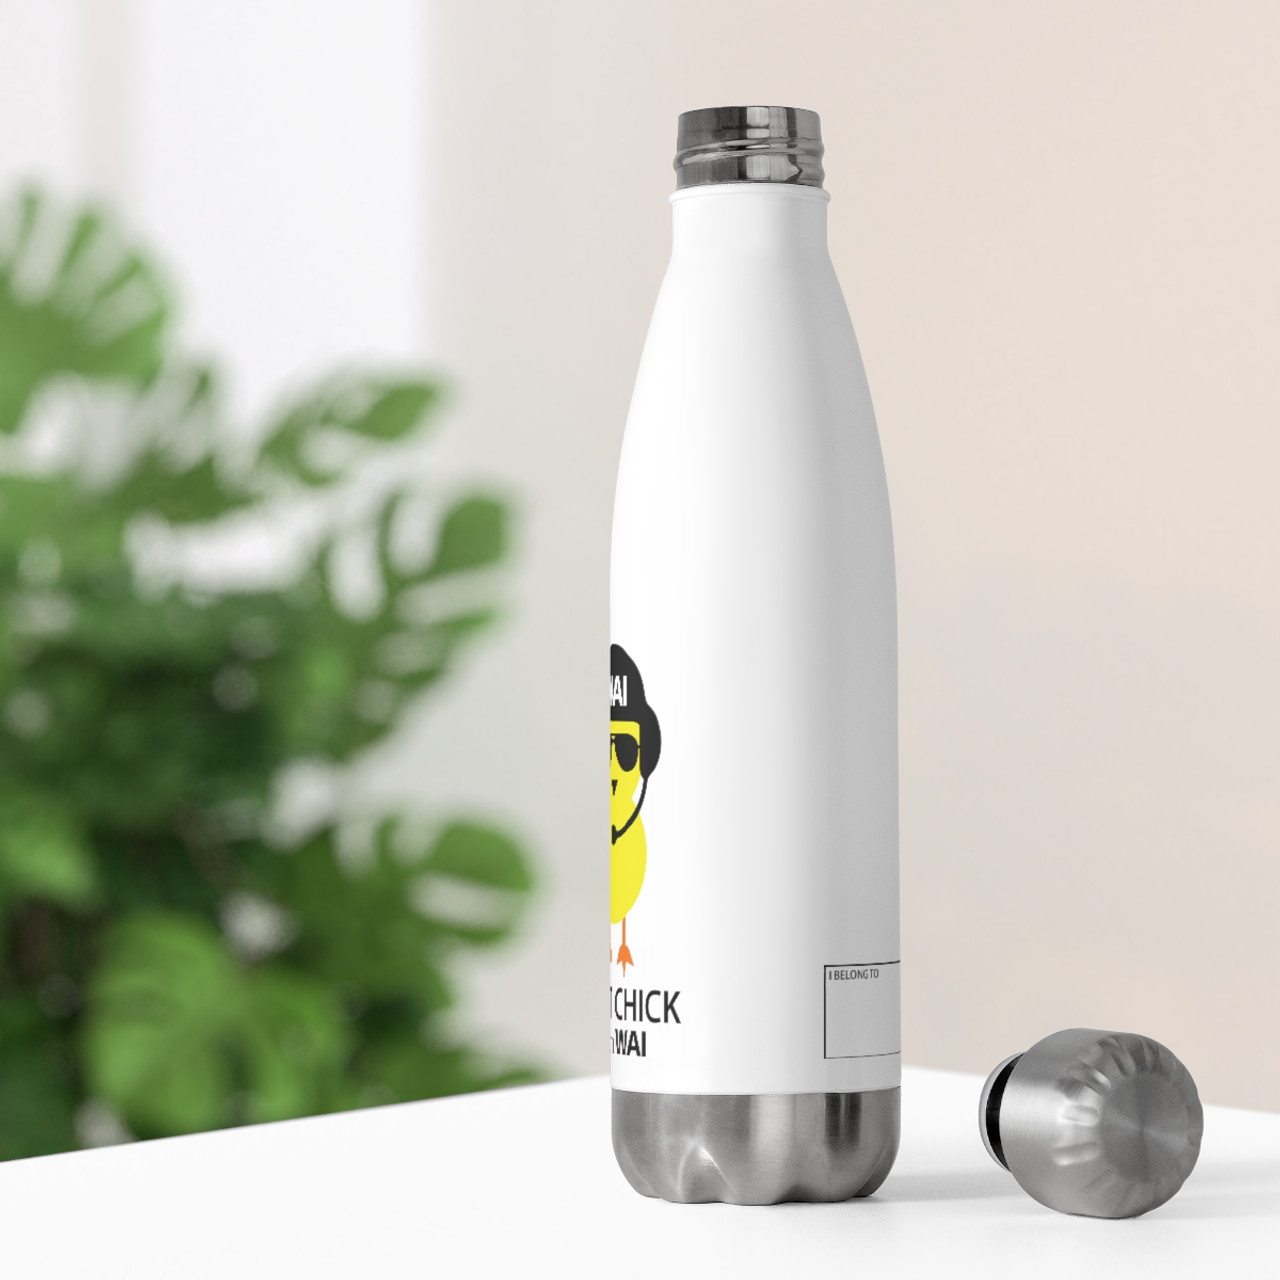 https://cdn11.bigcommerce.com/s-sqlllpksfp/images/stencil/1280x1280/products/172/710/pilot-chick-20oz-stainless-steel-insulated-bottle__95544.1671030486.jpg?c=1?imbypass=on